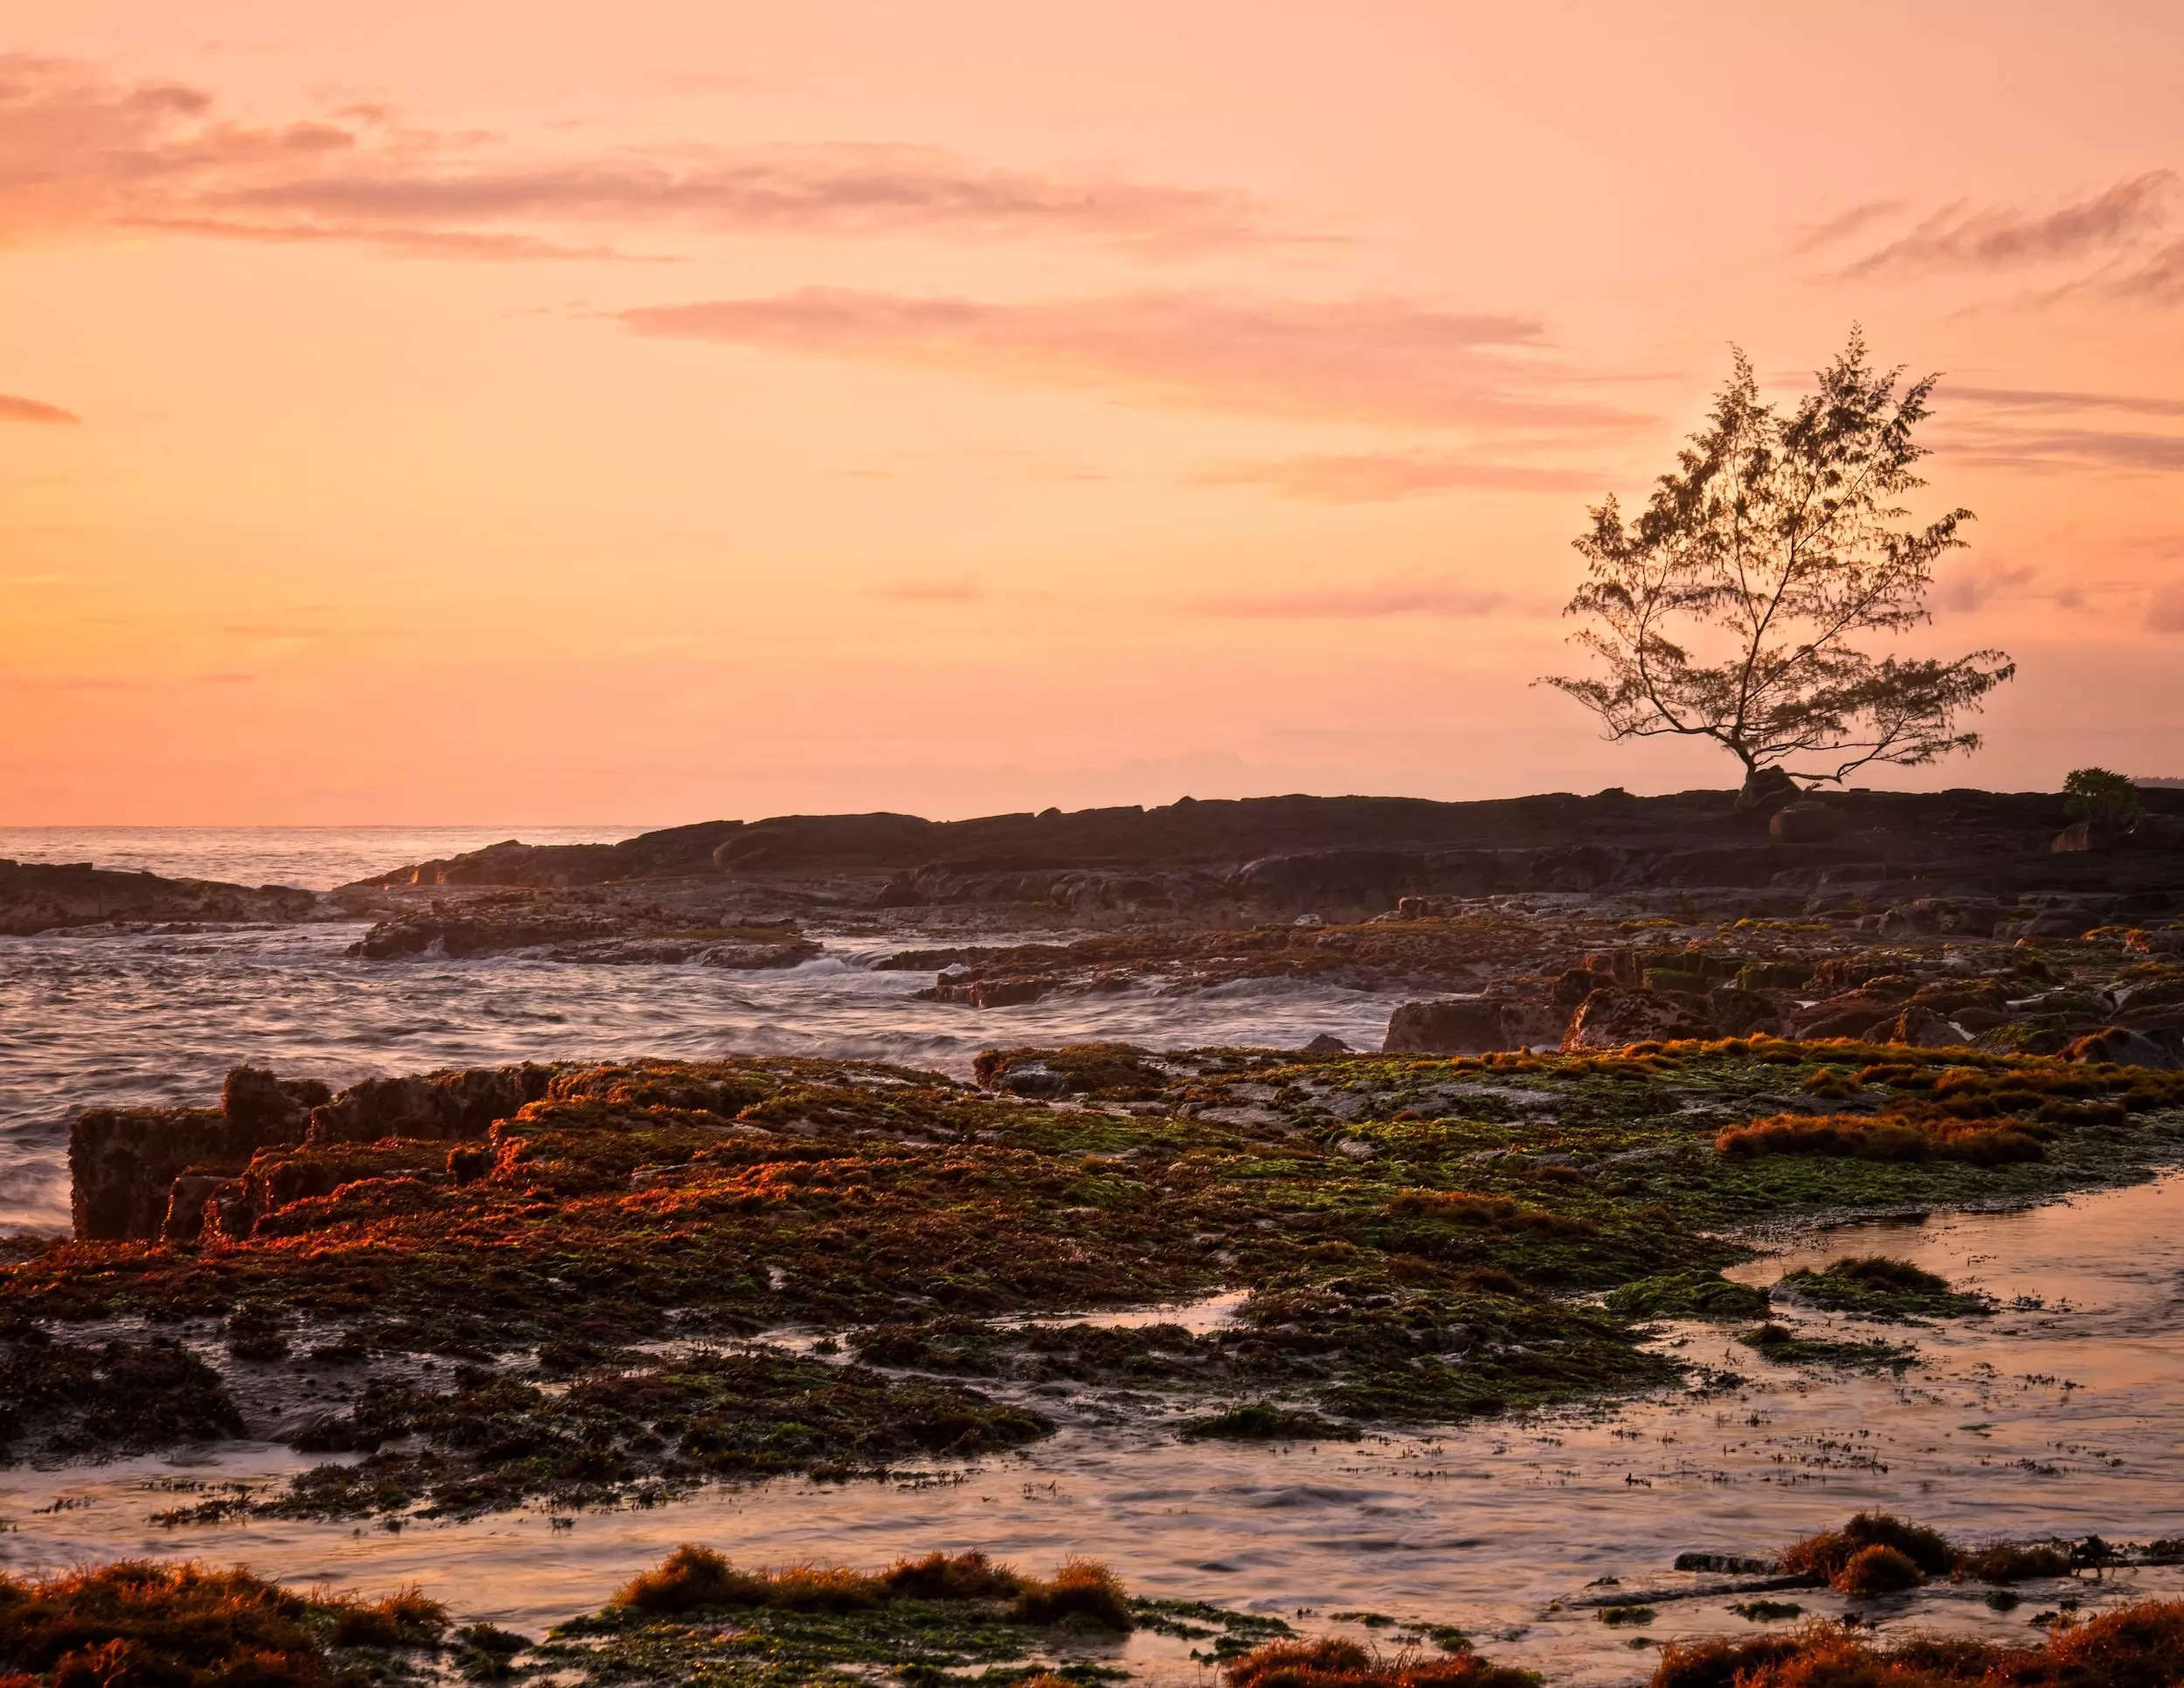 Sunset at a rocky beach in Hawaii.